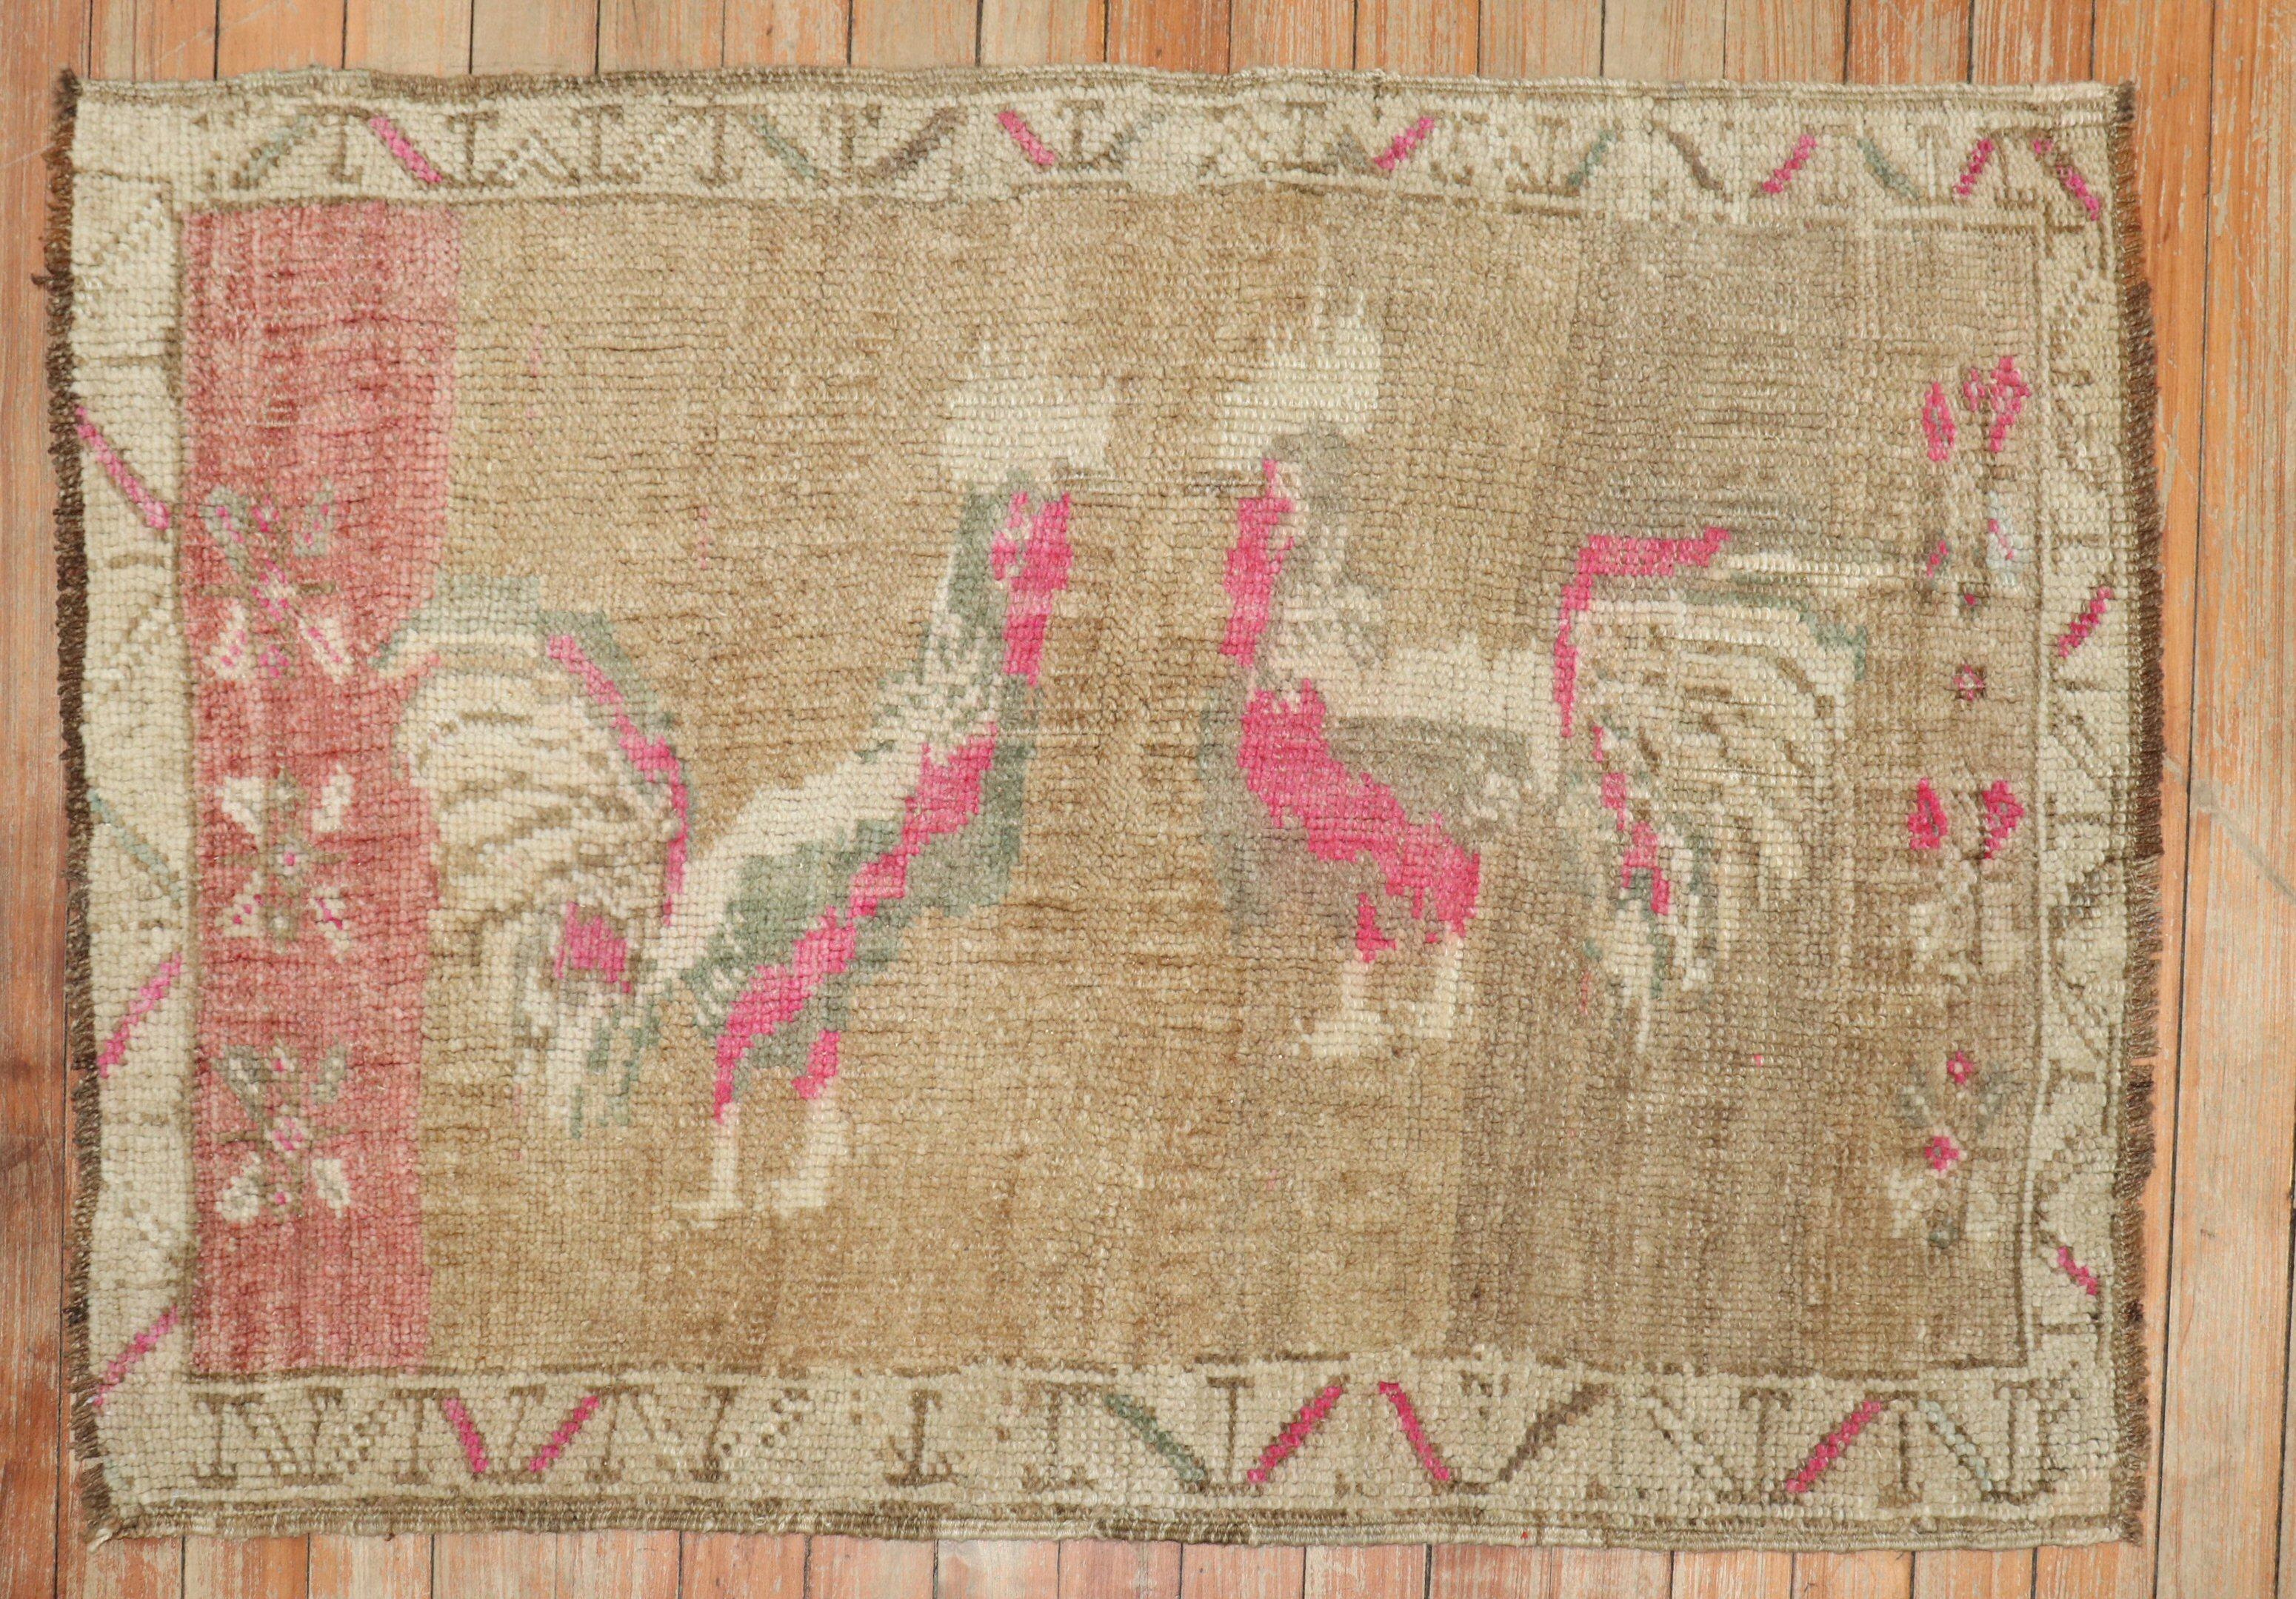 Mid-20th Century Turkish rug depicting 2 roosters on a brown field.

Measures: 2.2